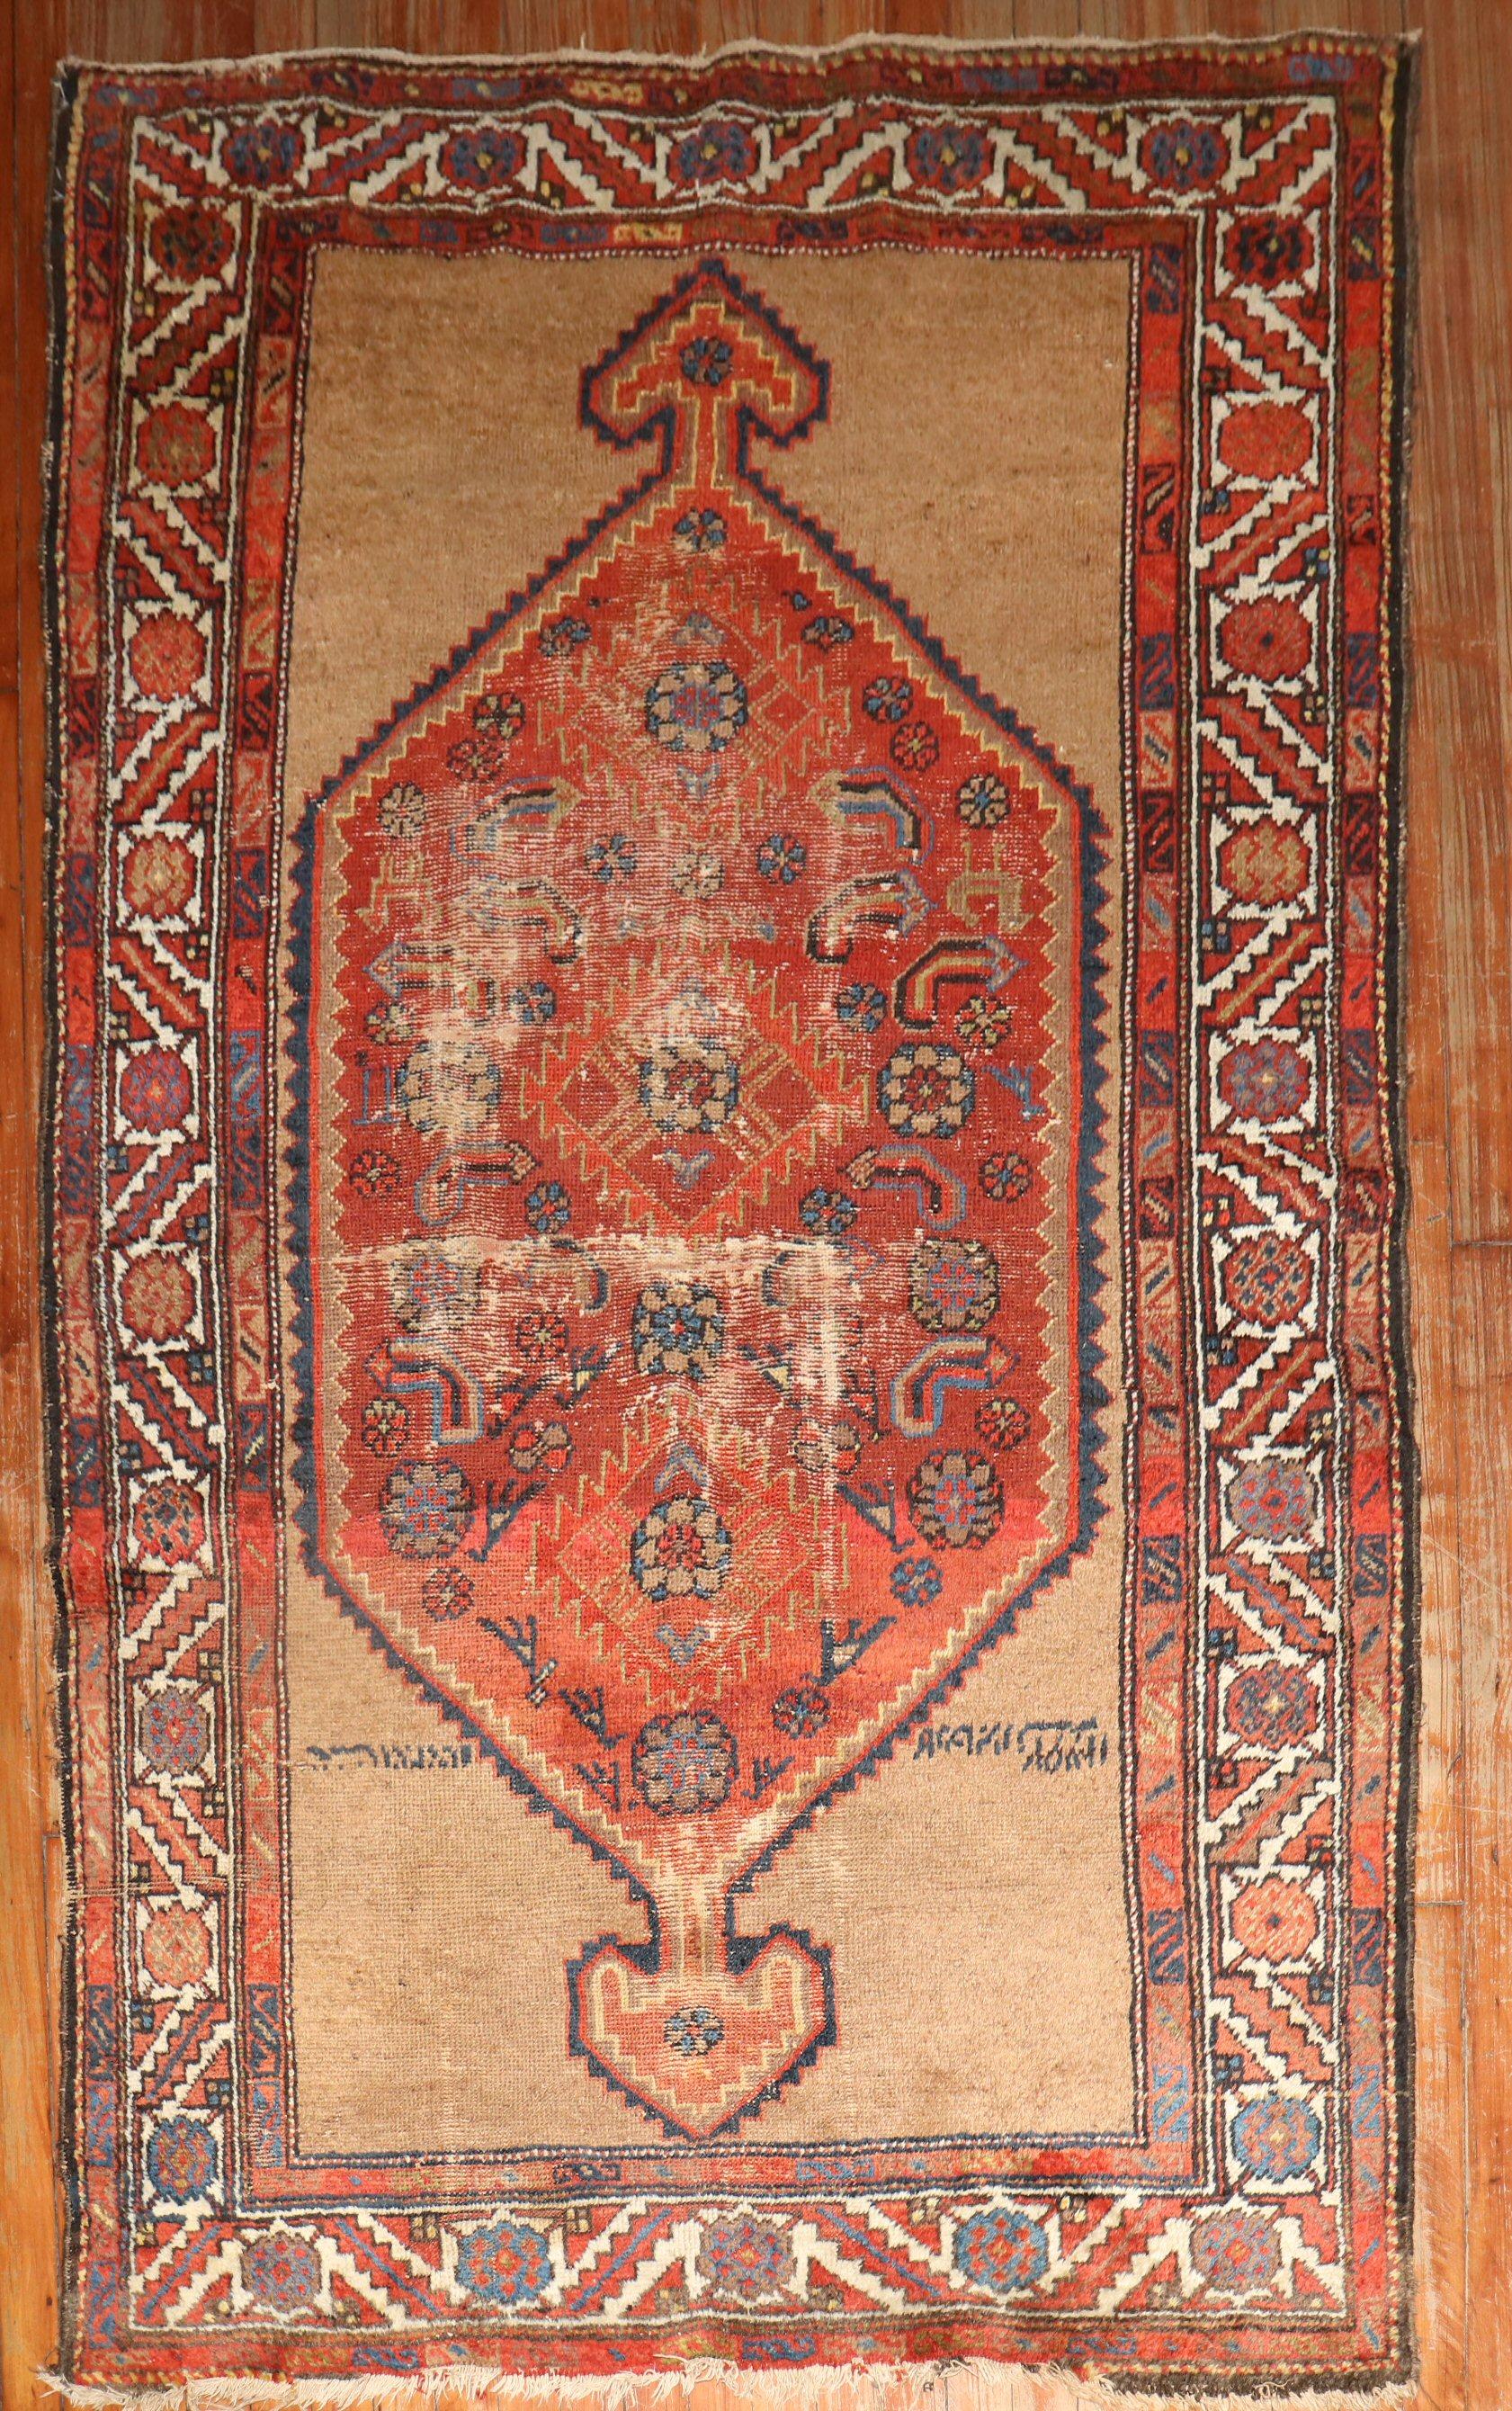 early 20th century persian tribal camel field worn rug

Measures: 4'1